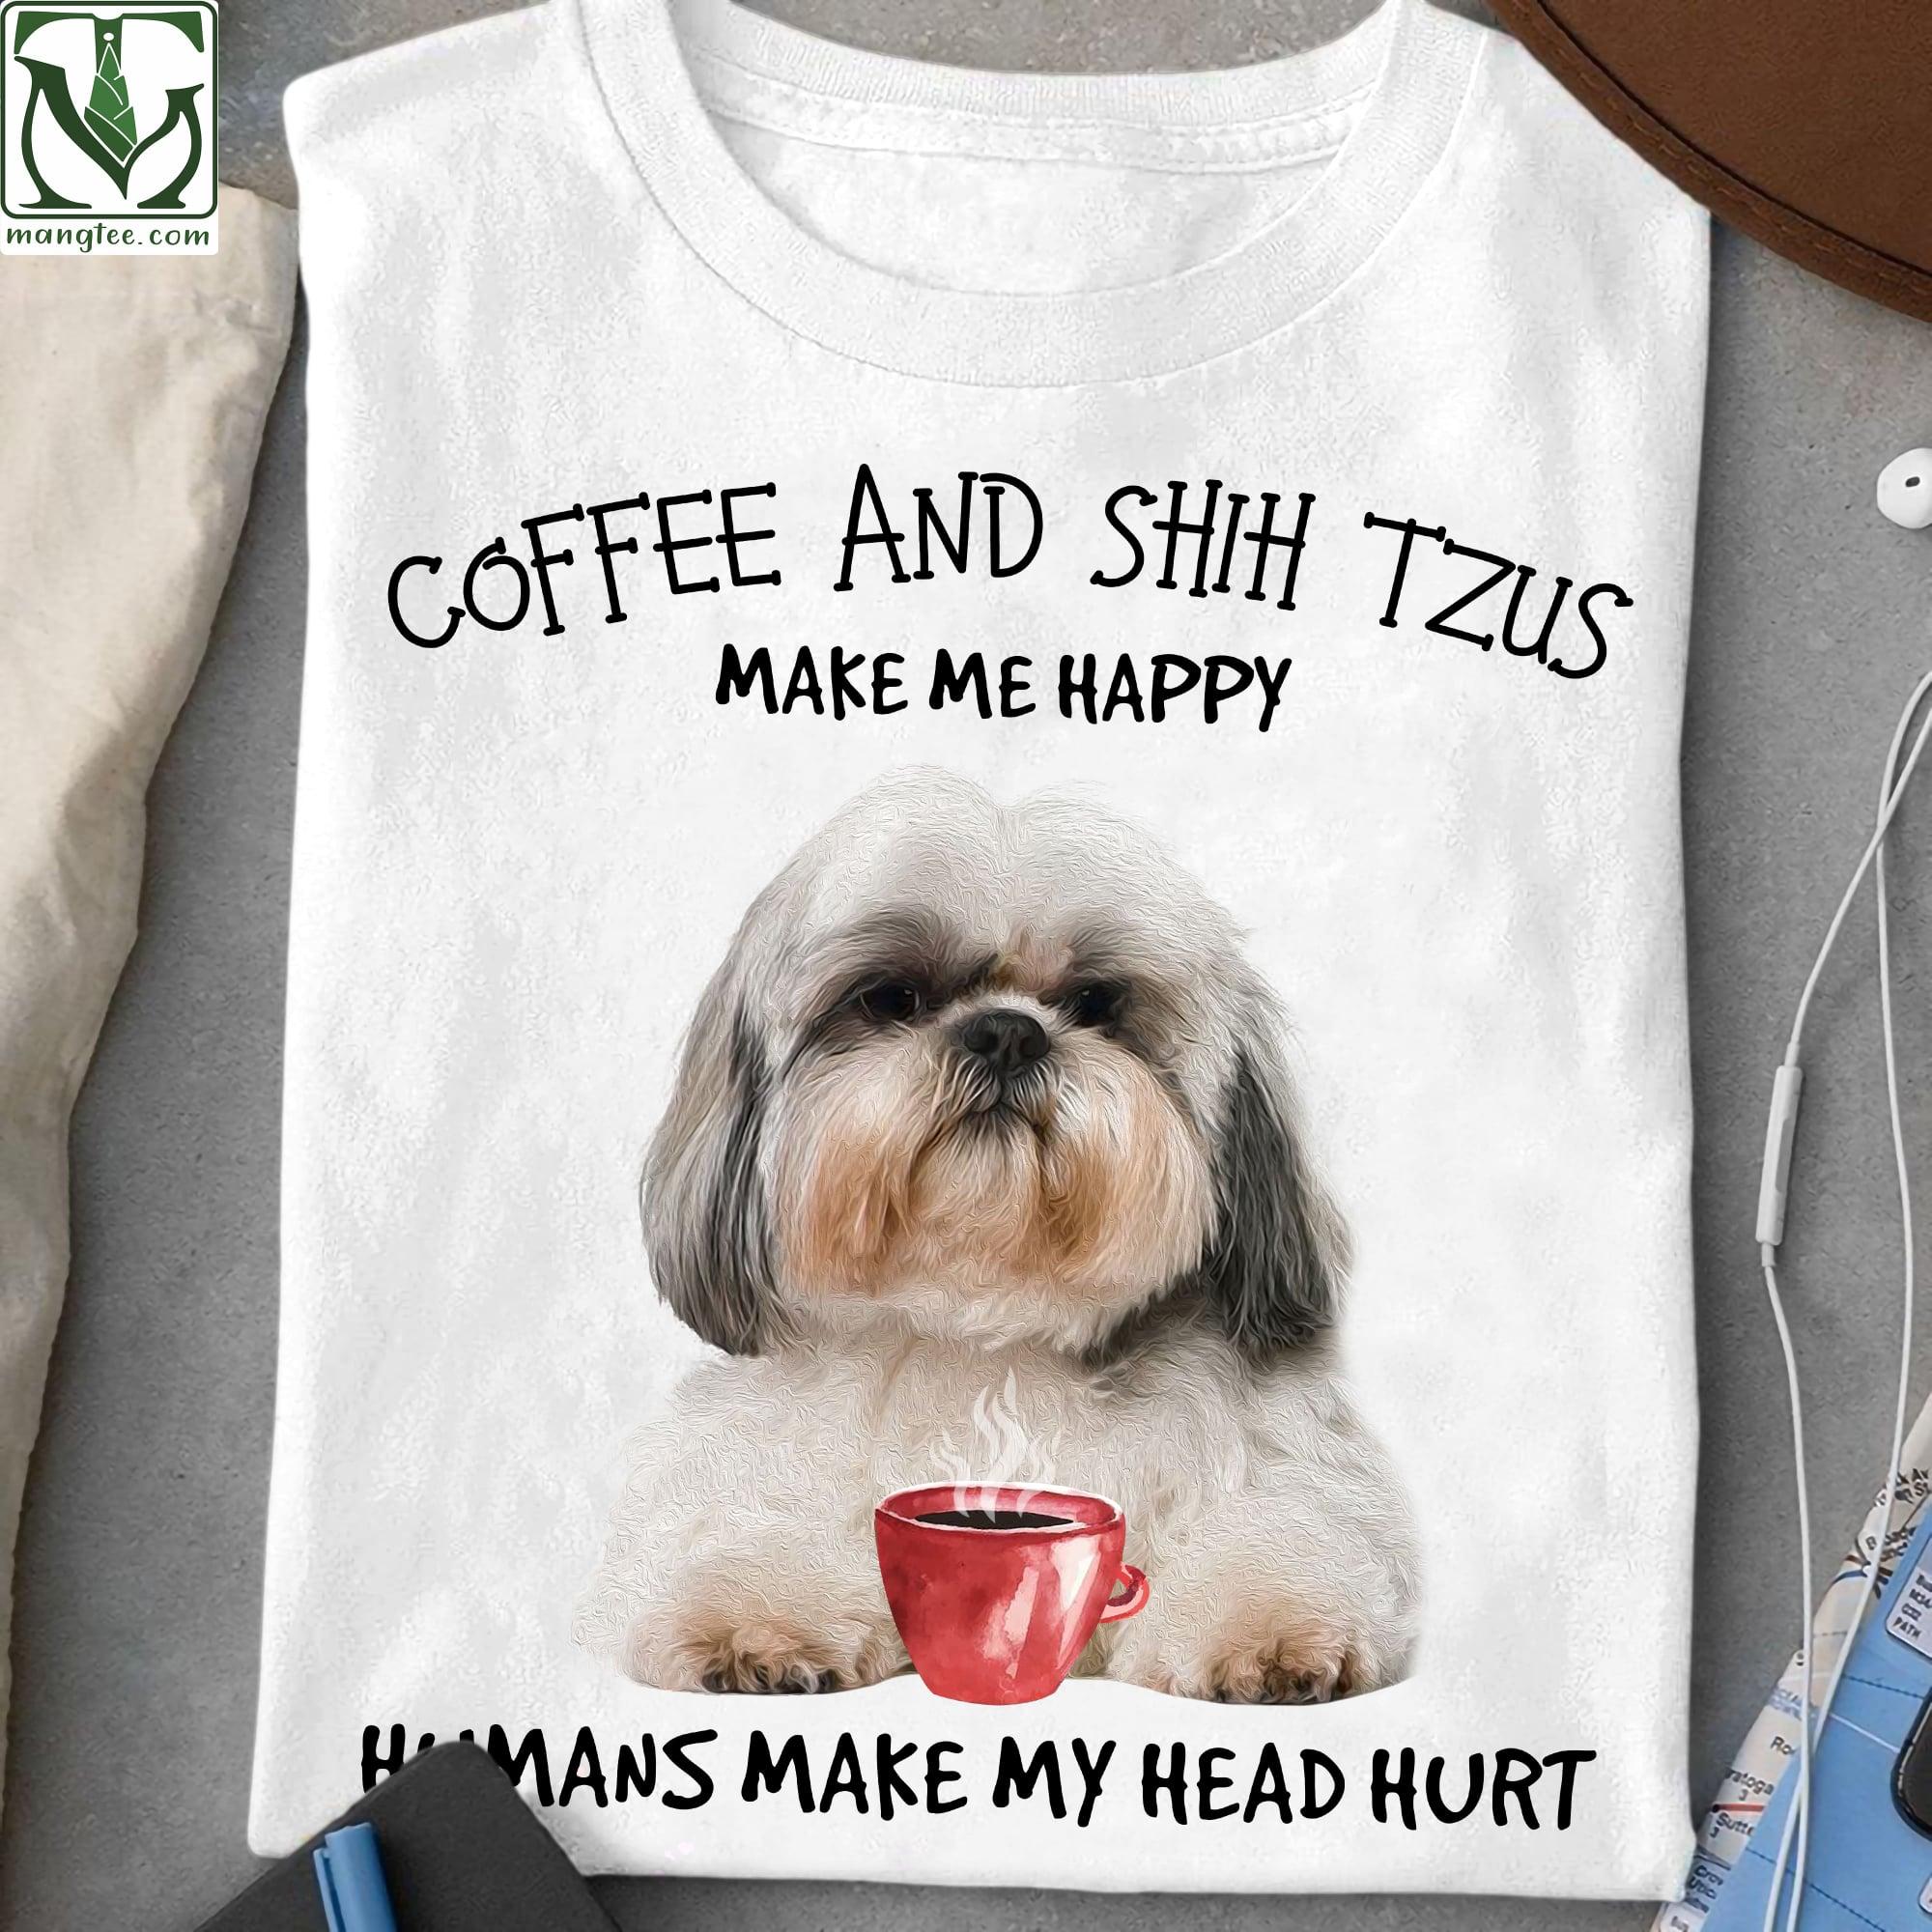 Coffee and Shih Tzus make me happy, humans make my head hurt - Gift for dog lovers, dog and coffee